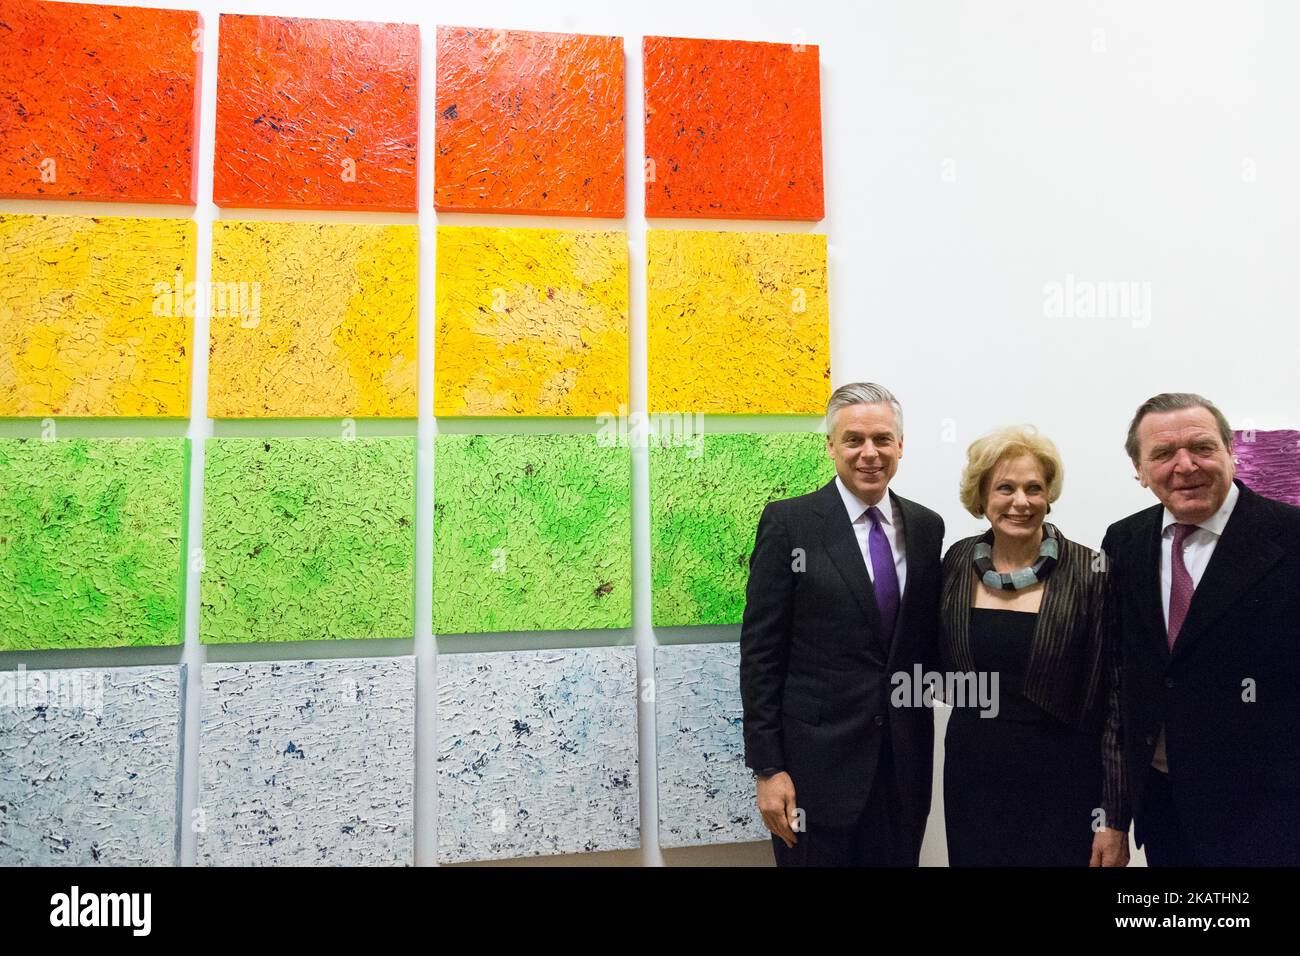 US Ambassador to Russia Jon Huntsman Jr., American artist Susan Swartz and Nord Stream 2 Board Chairman, former German Chancellor Gerhard Schroeder (L-R) attend the opening of the Personal Path exhibition of Susan Swartz's works at the State Russian Museum, in Saint Petersburg, Russia, on 28 November 2017. (Photo by Igor Russak/NurPhoto) Stock Photo